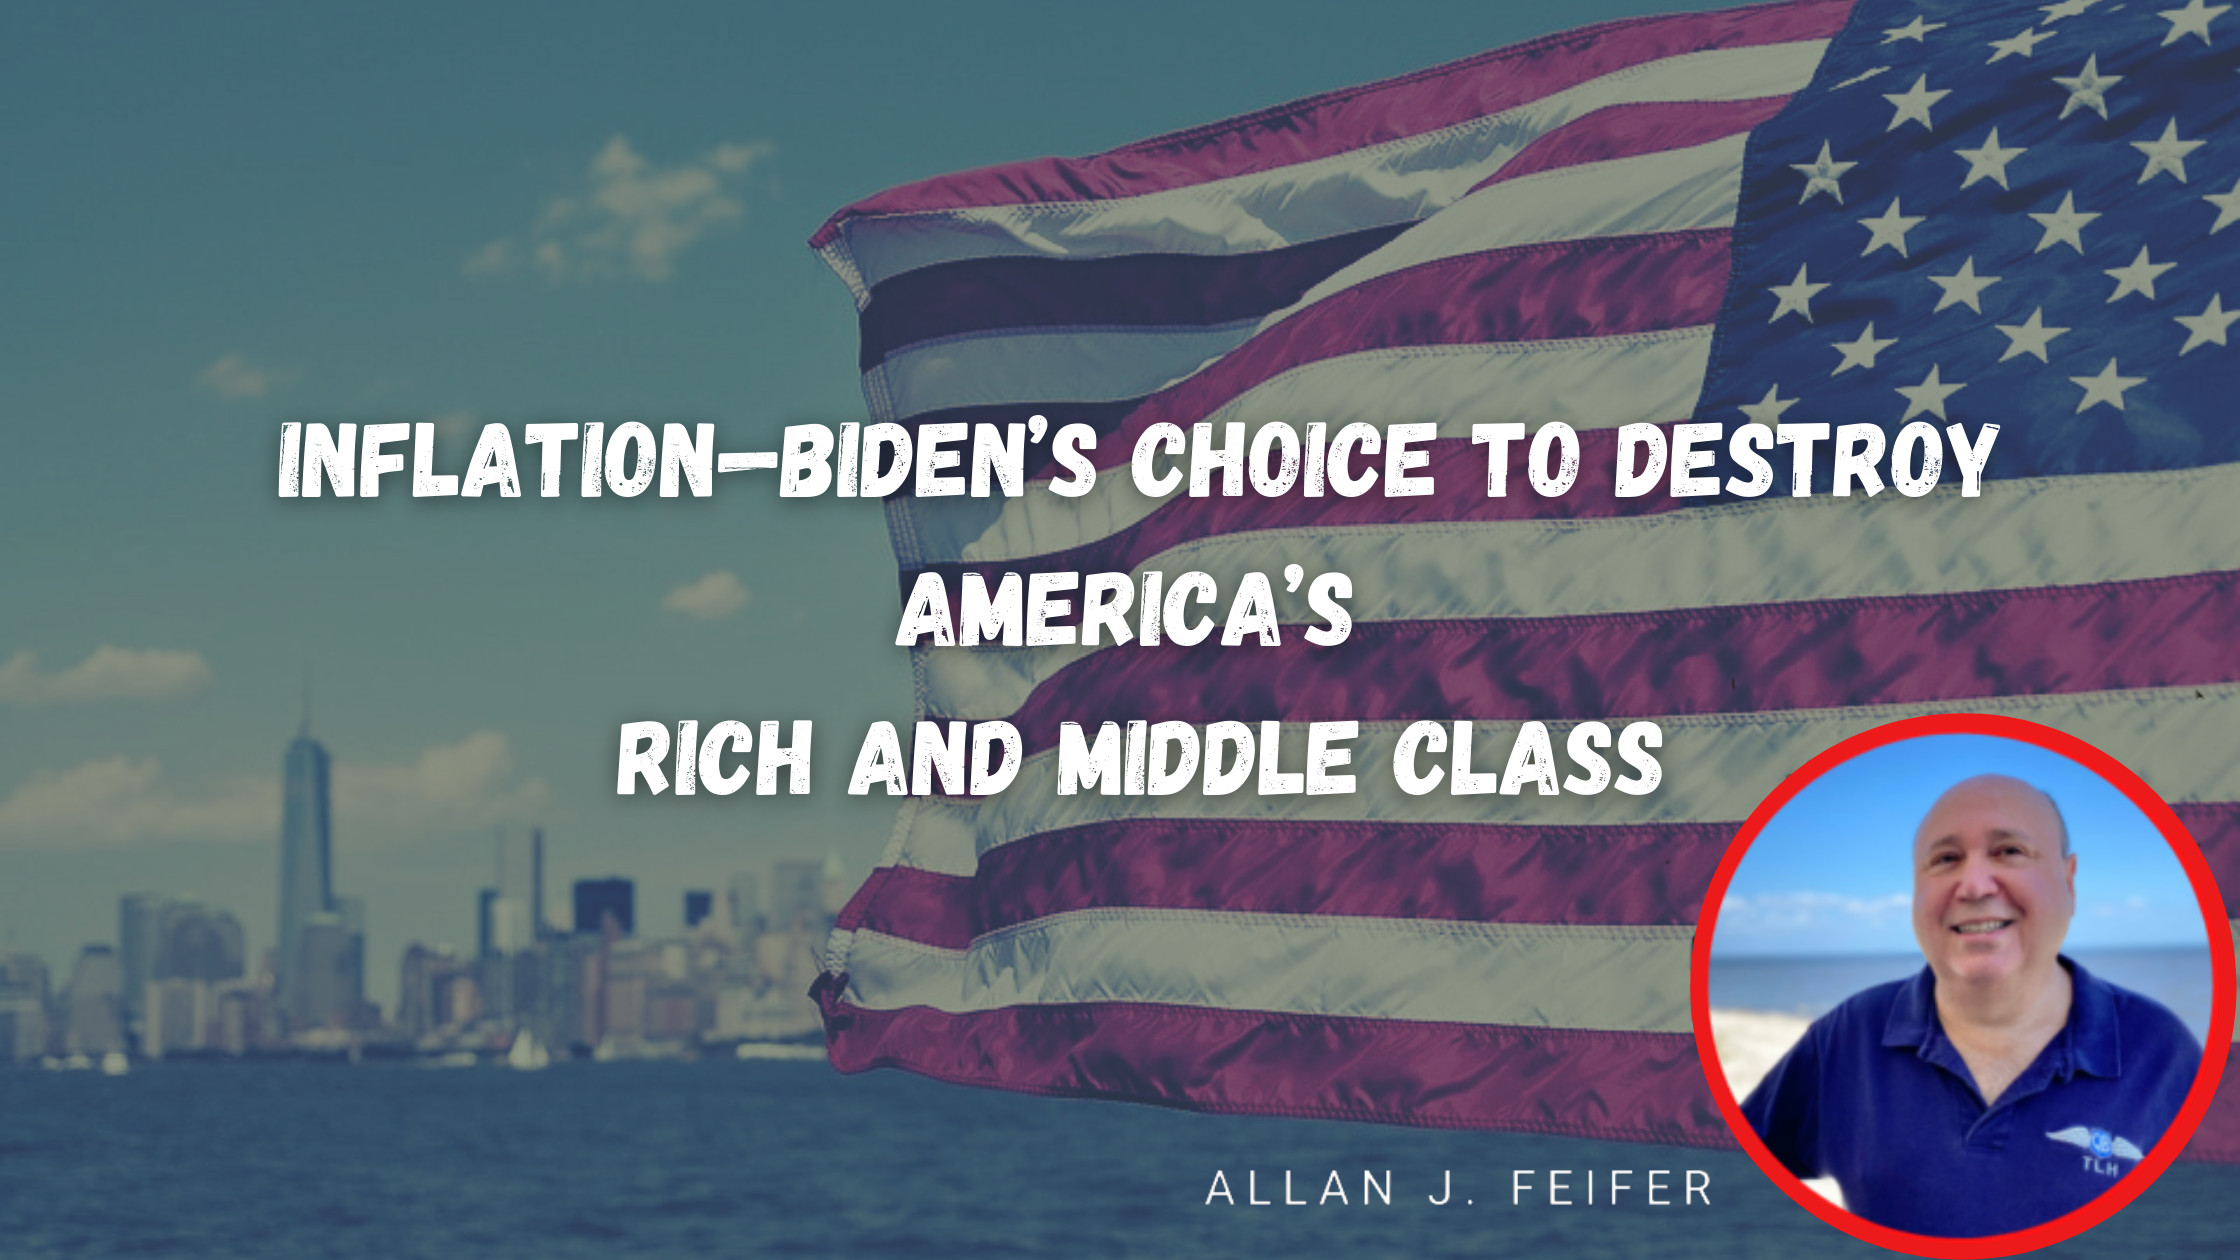 Inflation-Biden’s Choice to Destroy America’s Rich And Middle Class